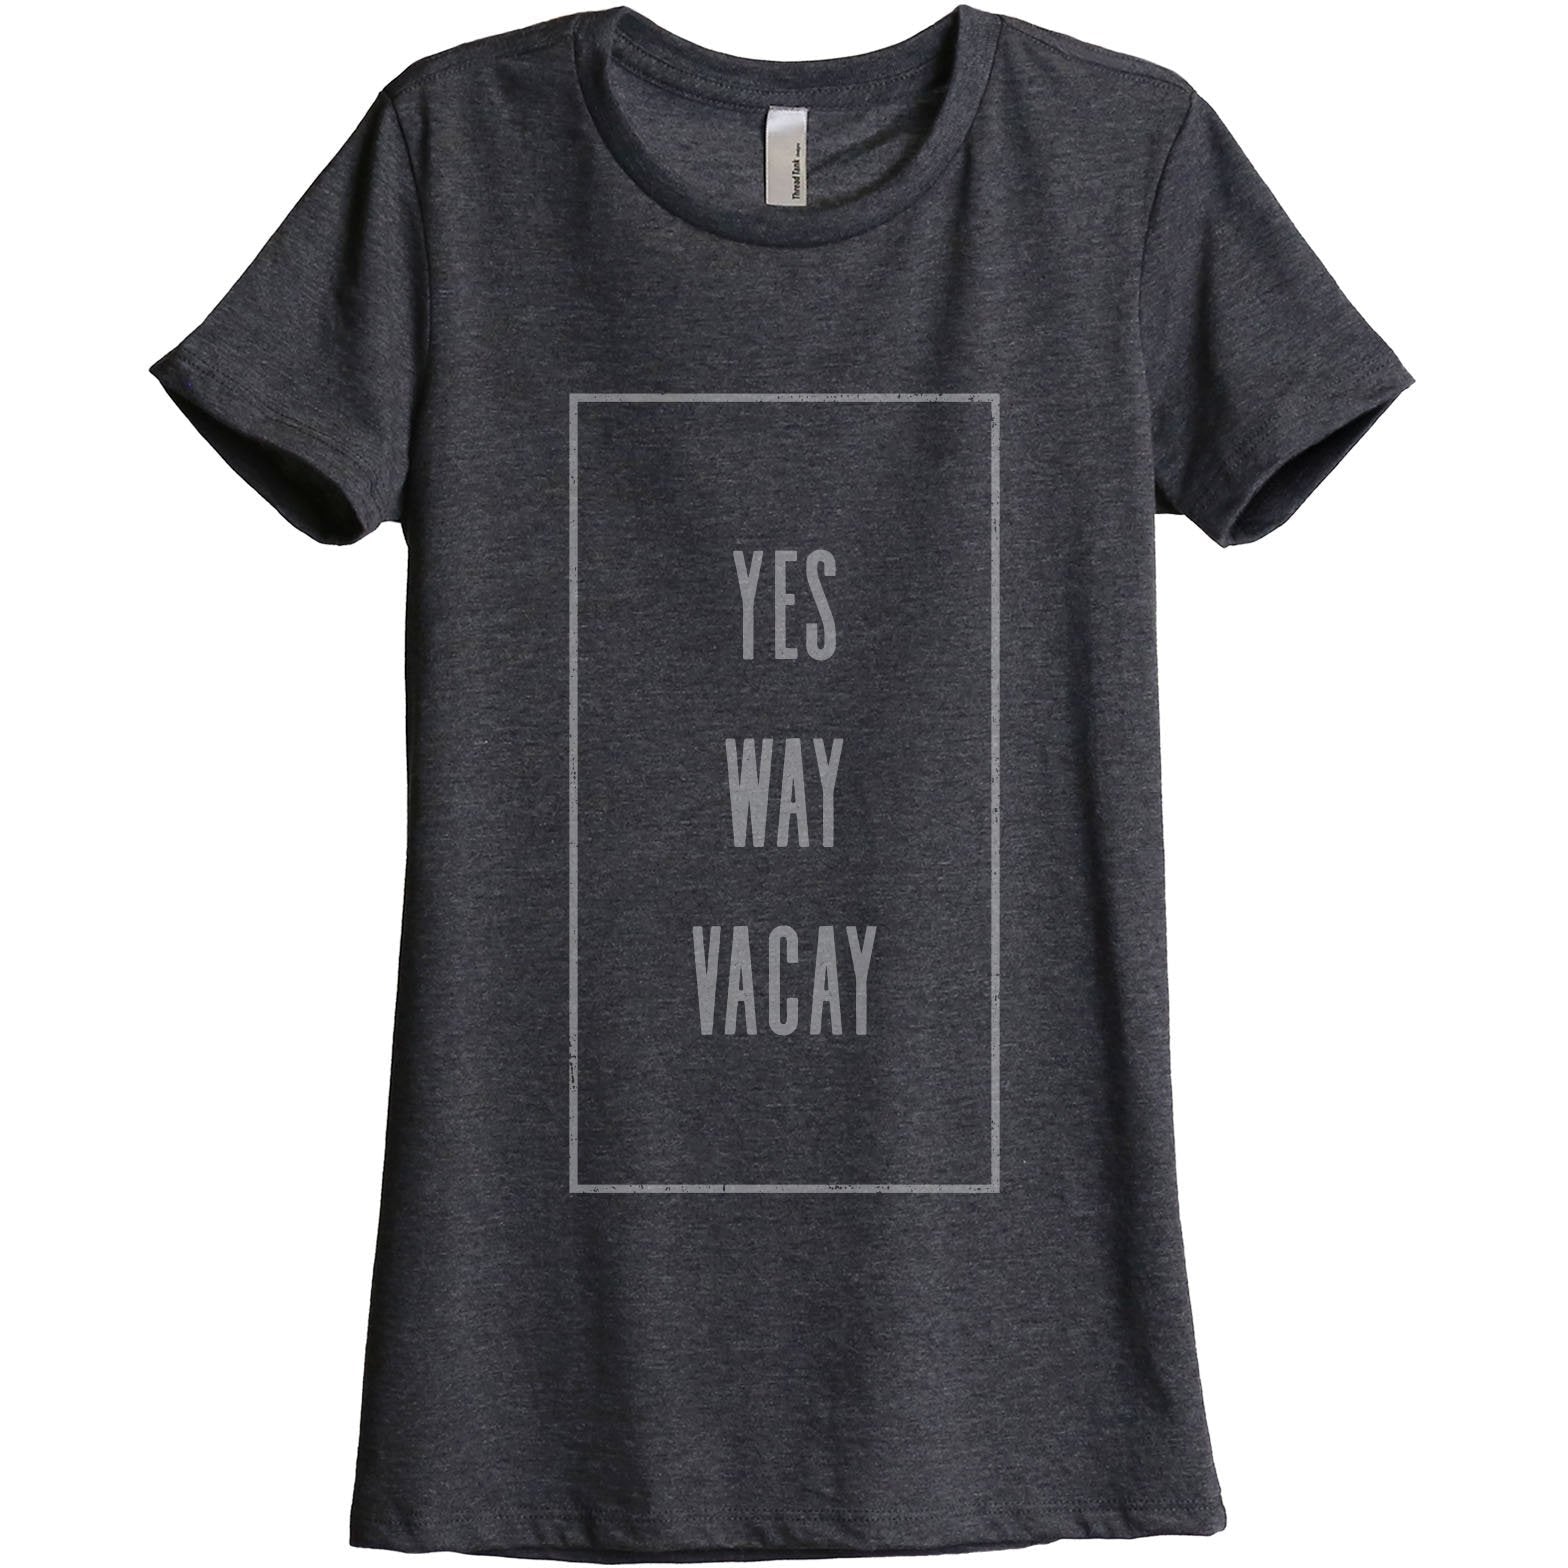 Yes Way Vacay - Stories You Can Wear